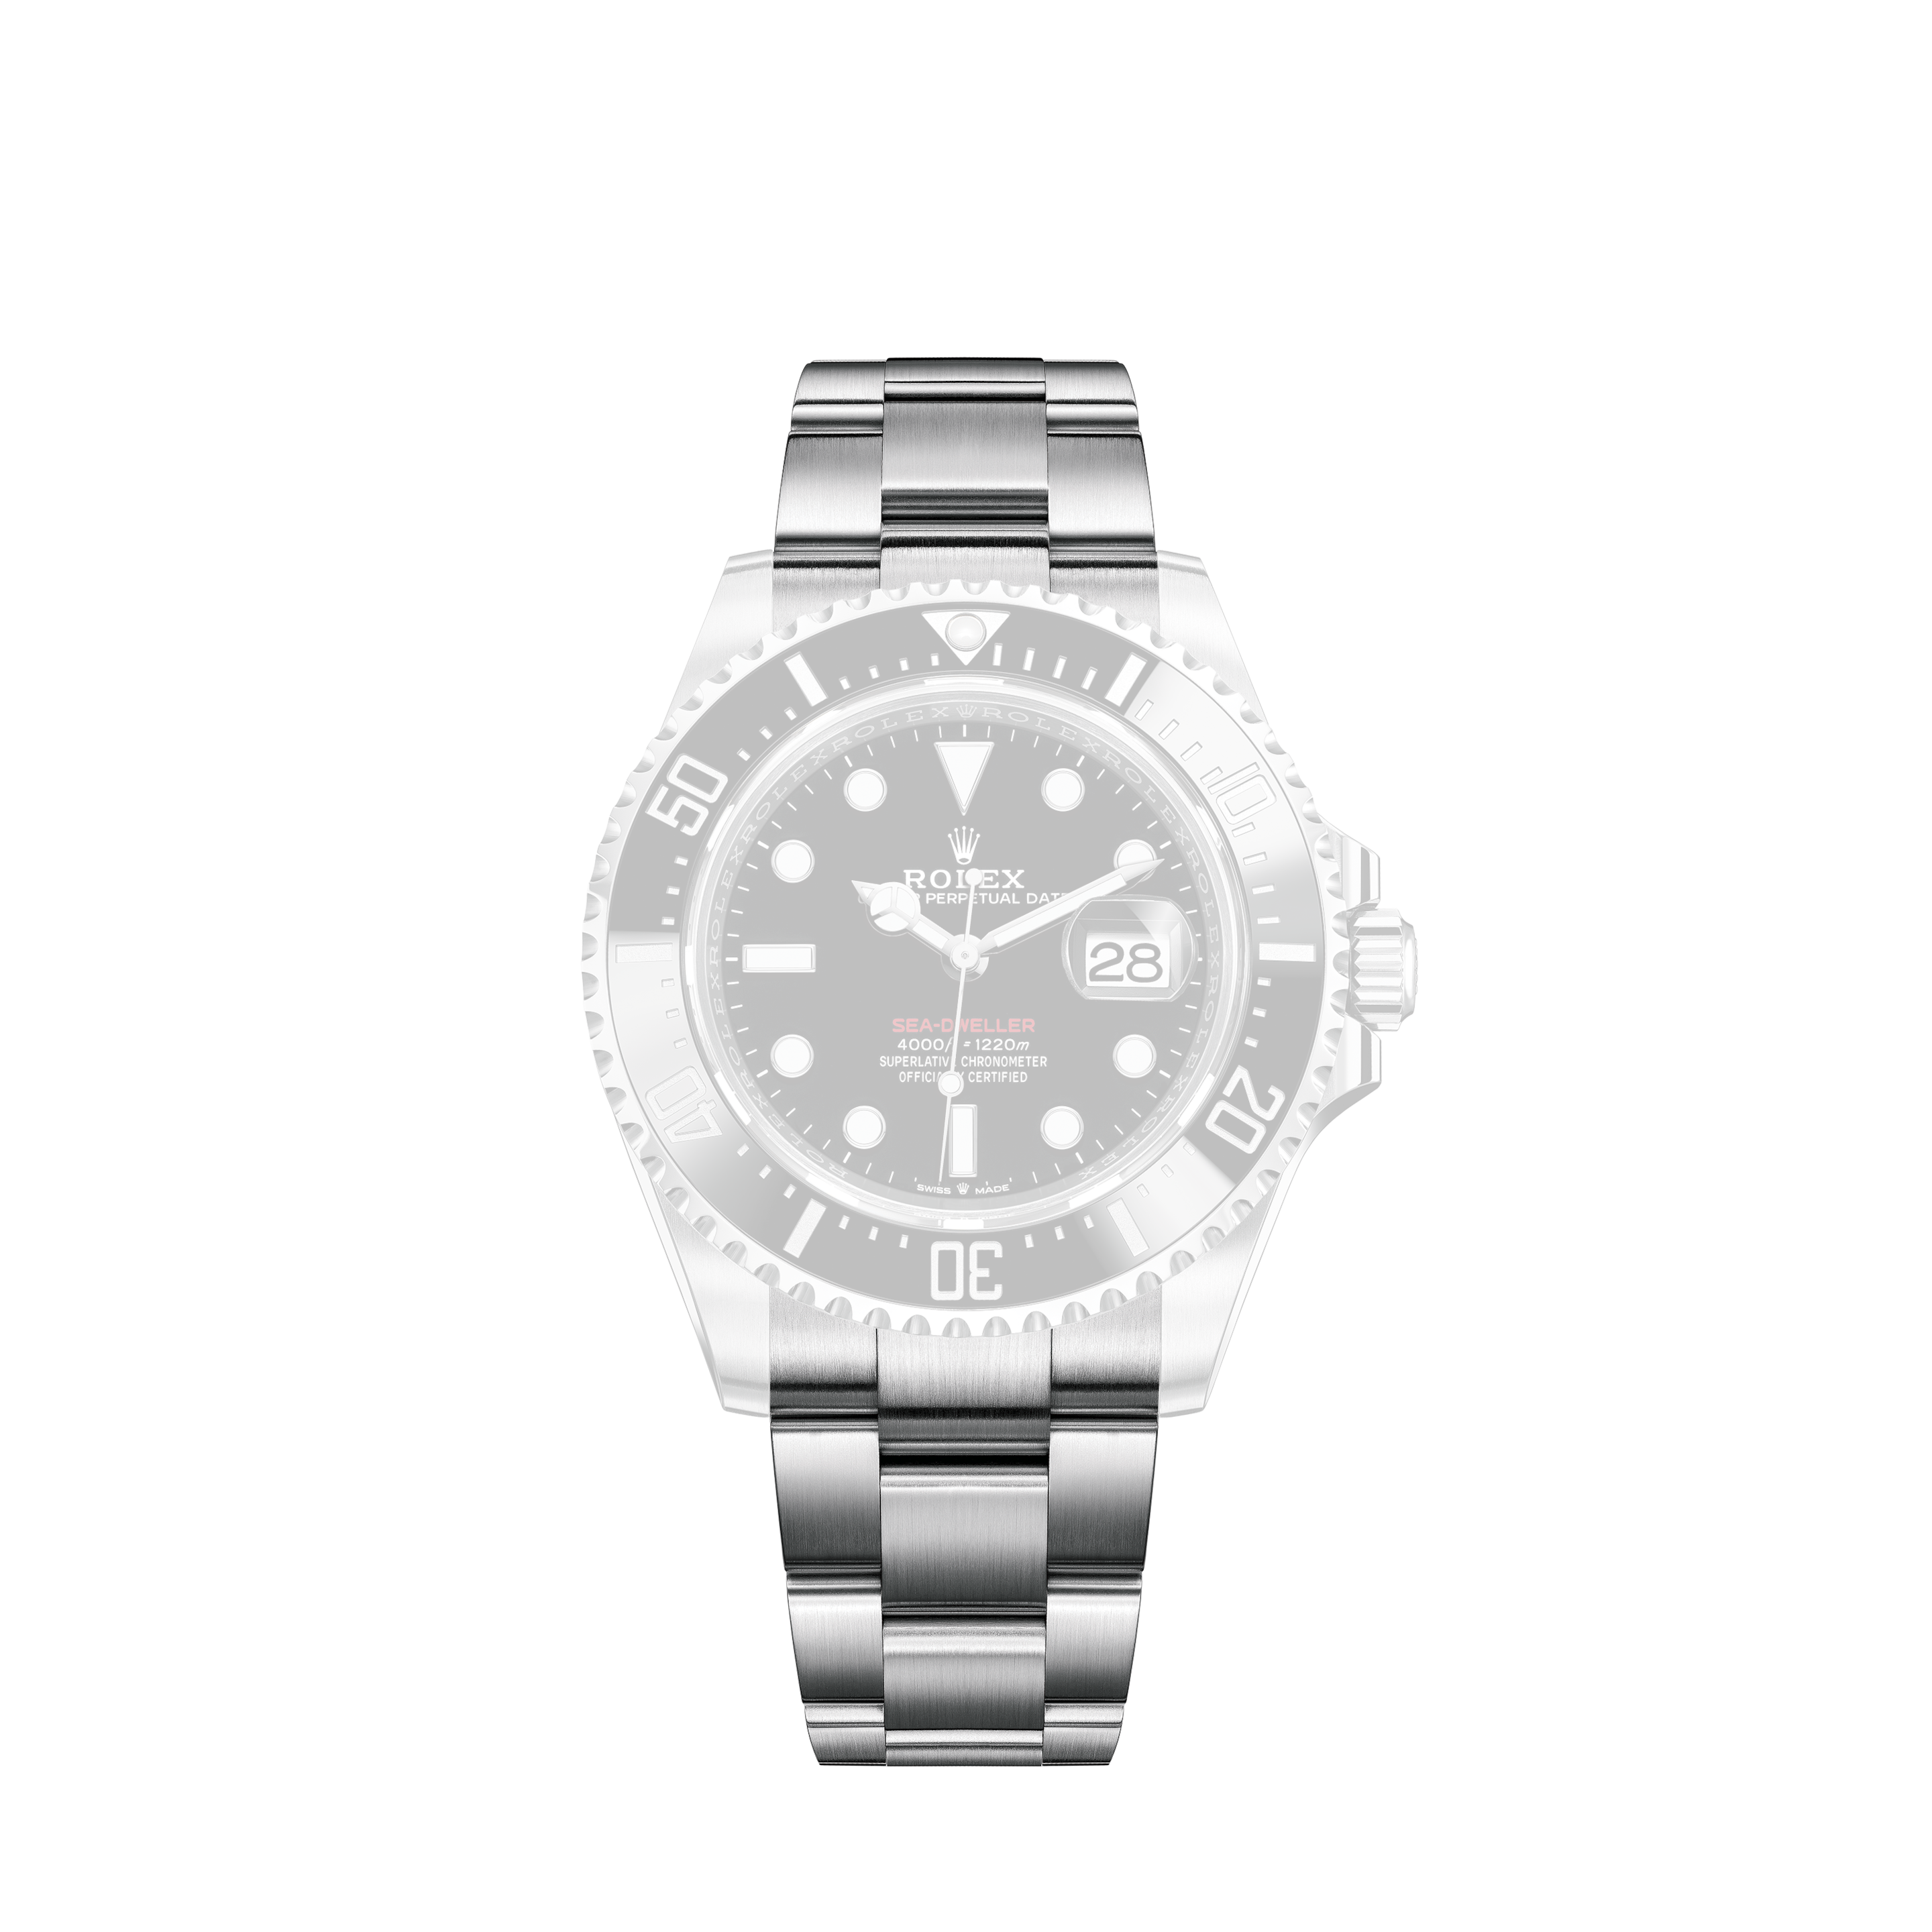 Rolex Oyster Perpetual Date 115234 black and diamonds dial.